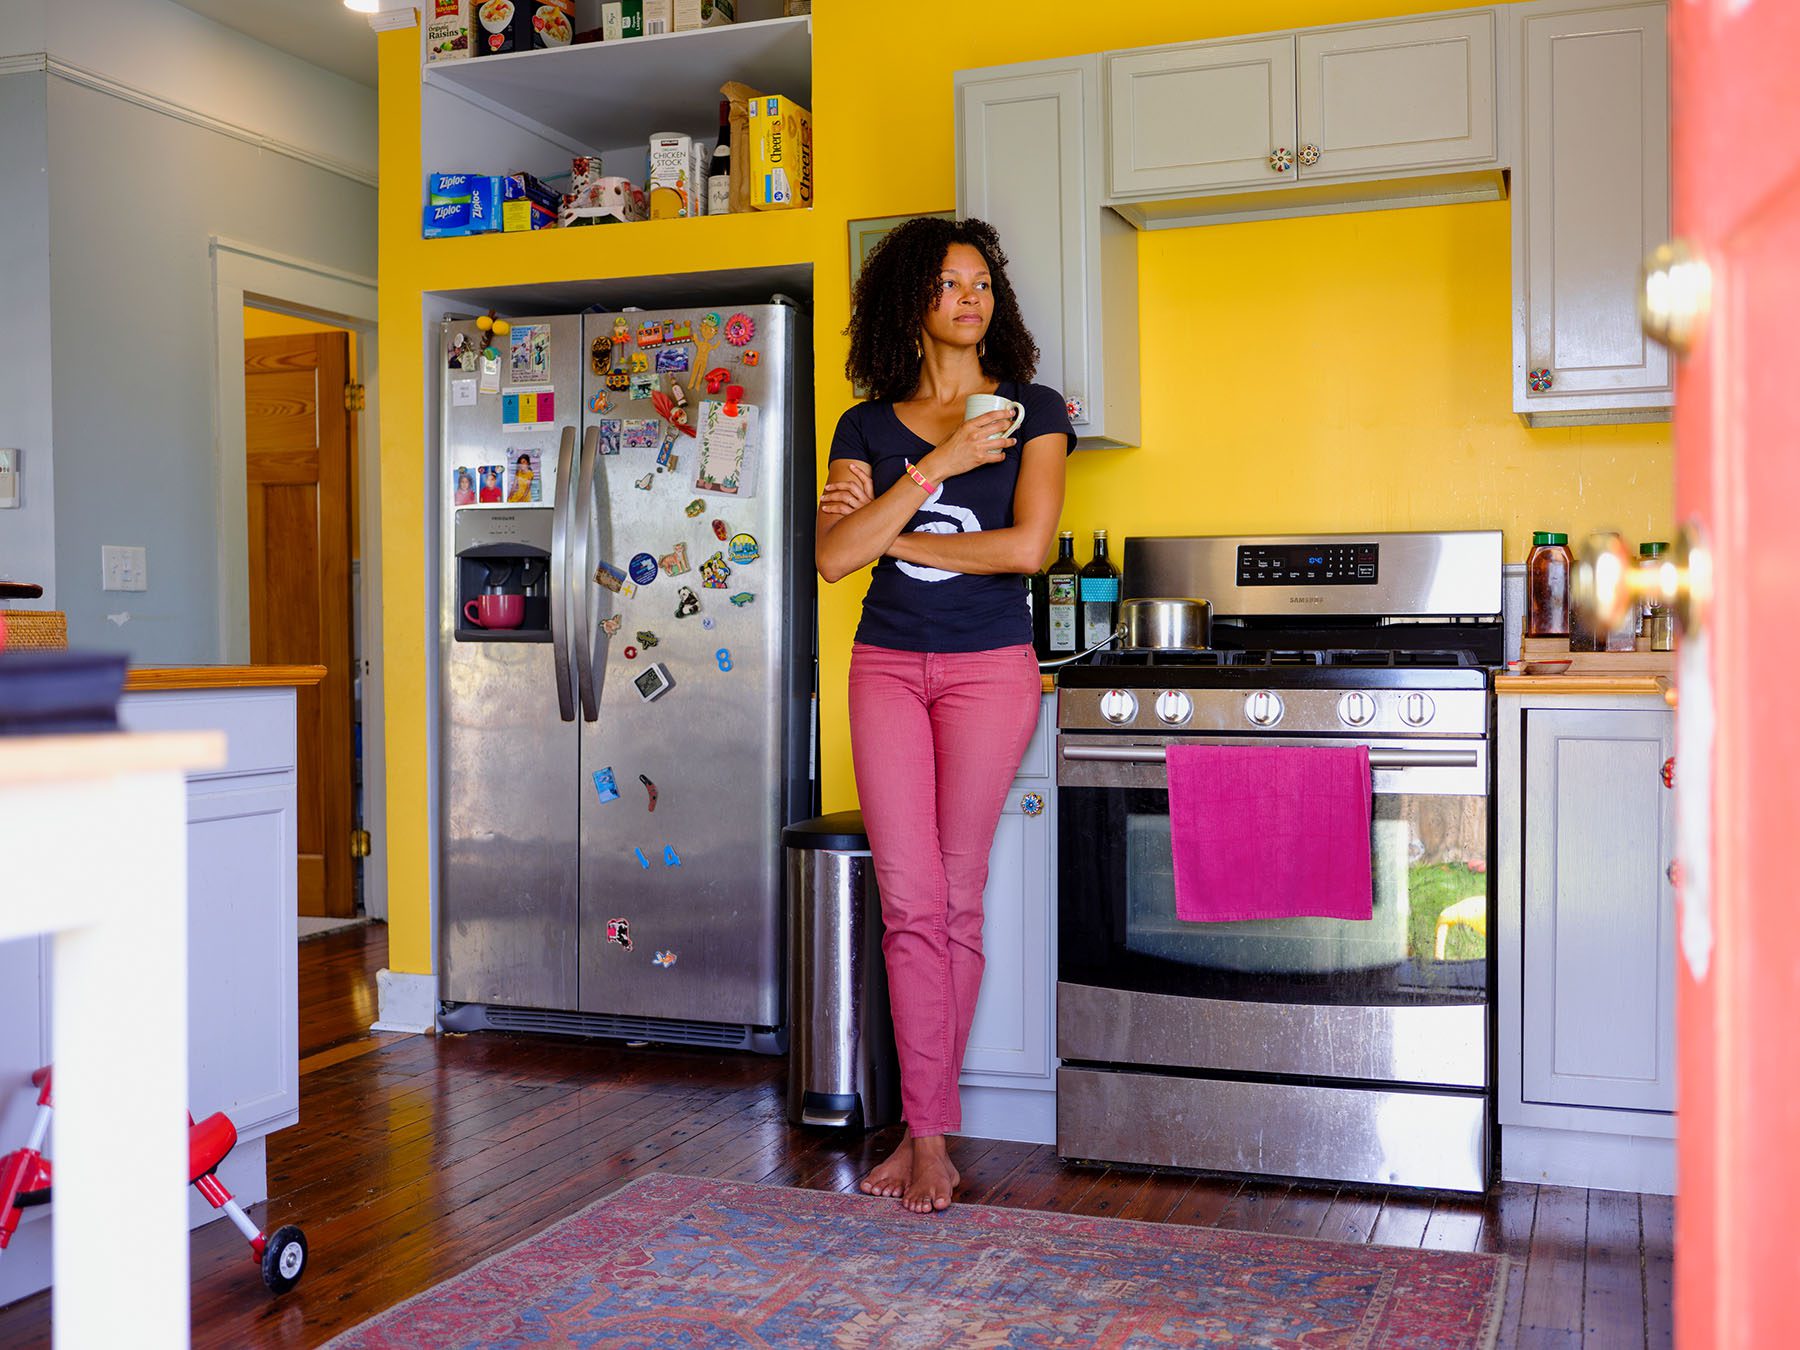 Malaika Ludman holds a mug in her kitchen as she poses for a portrait.